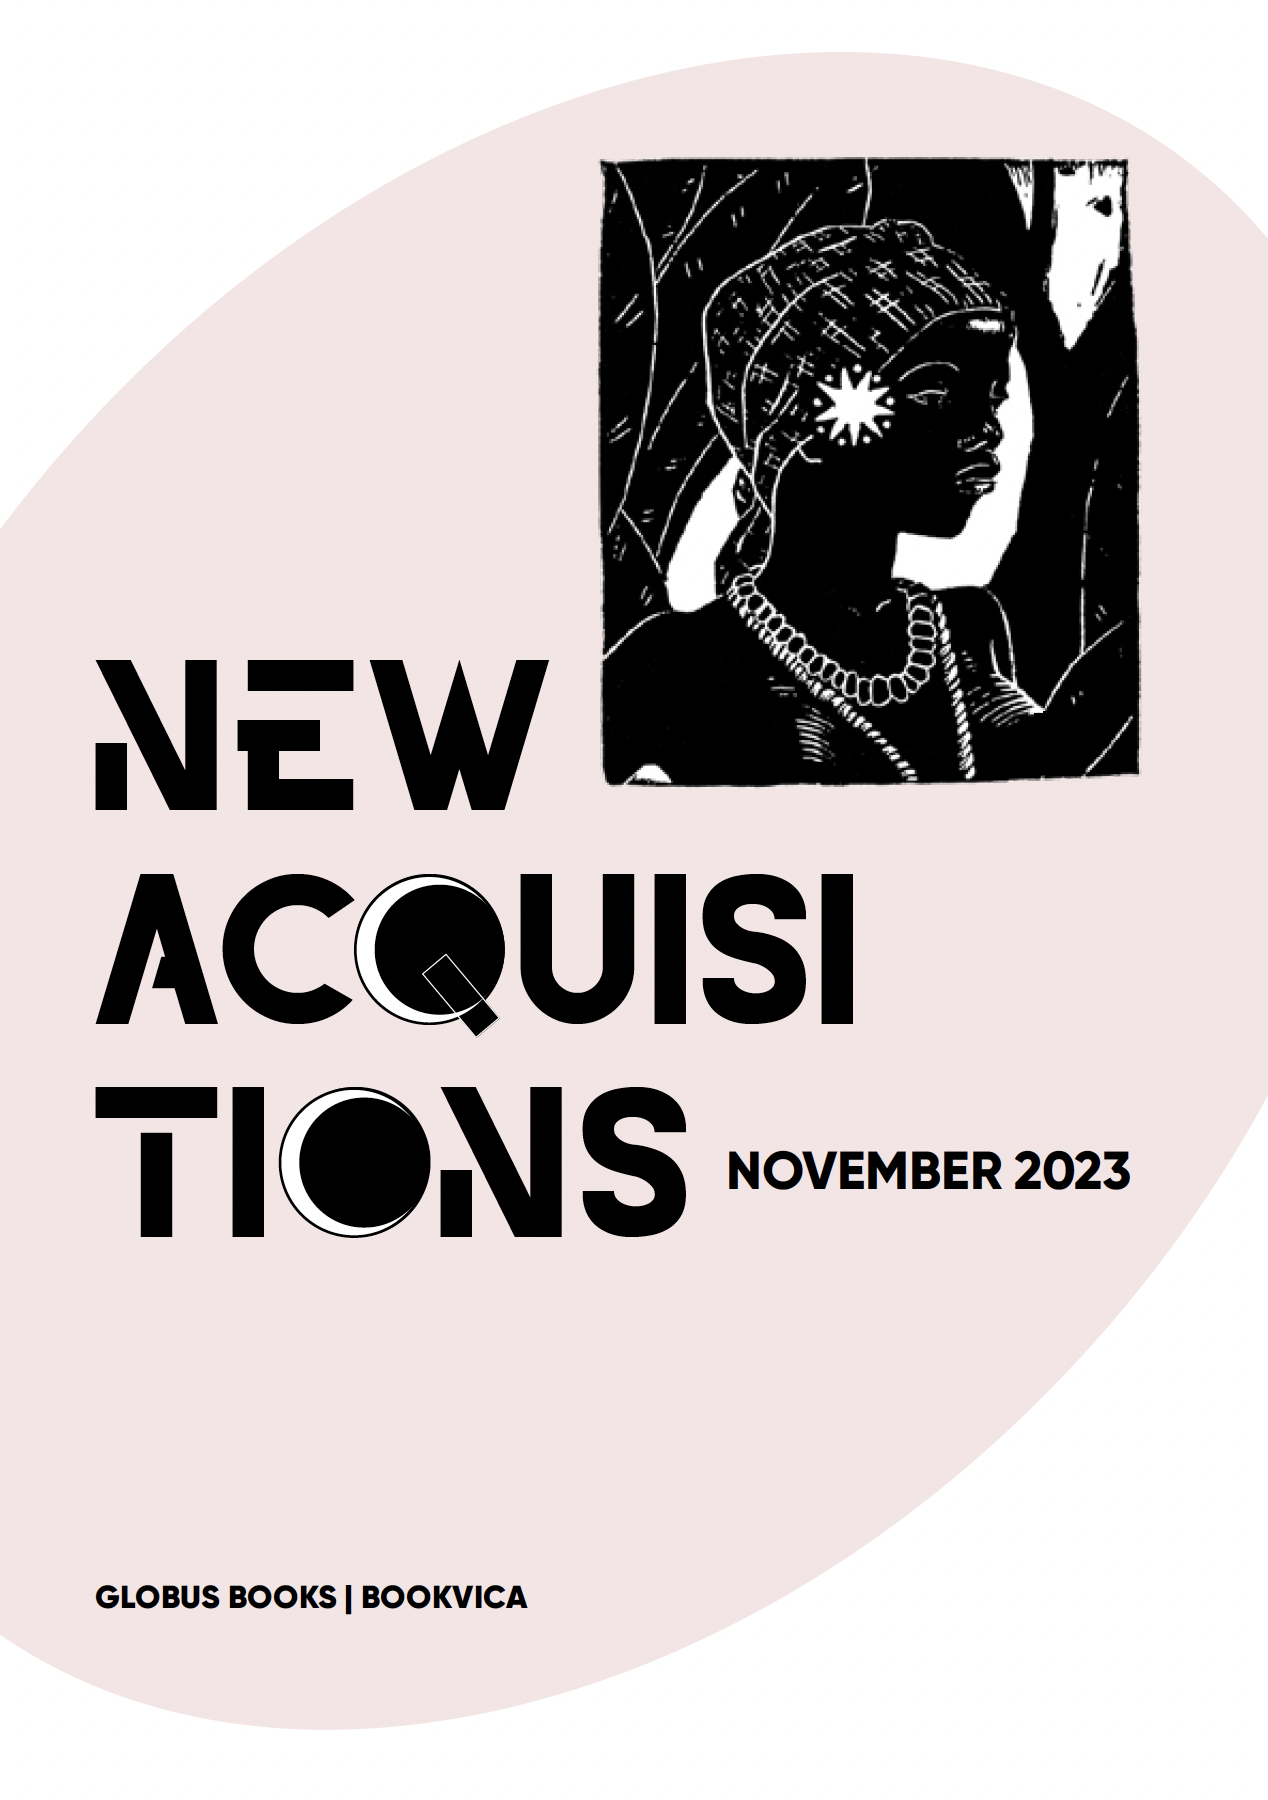 November 2023. New Acquisitions